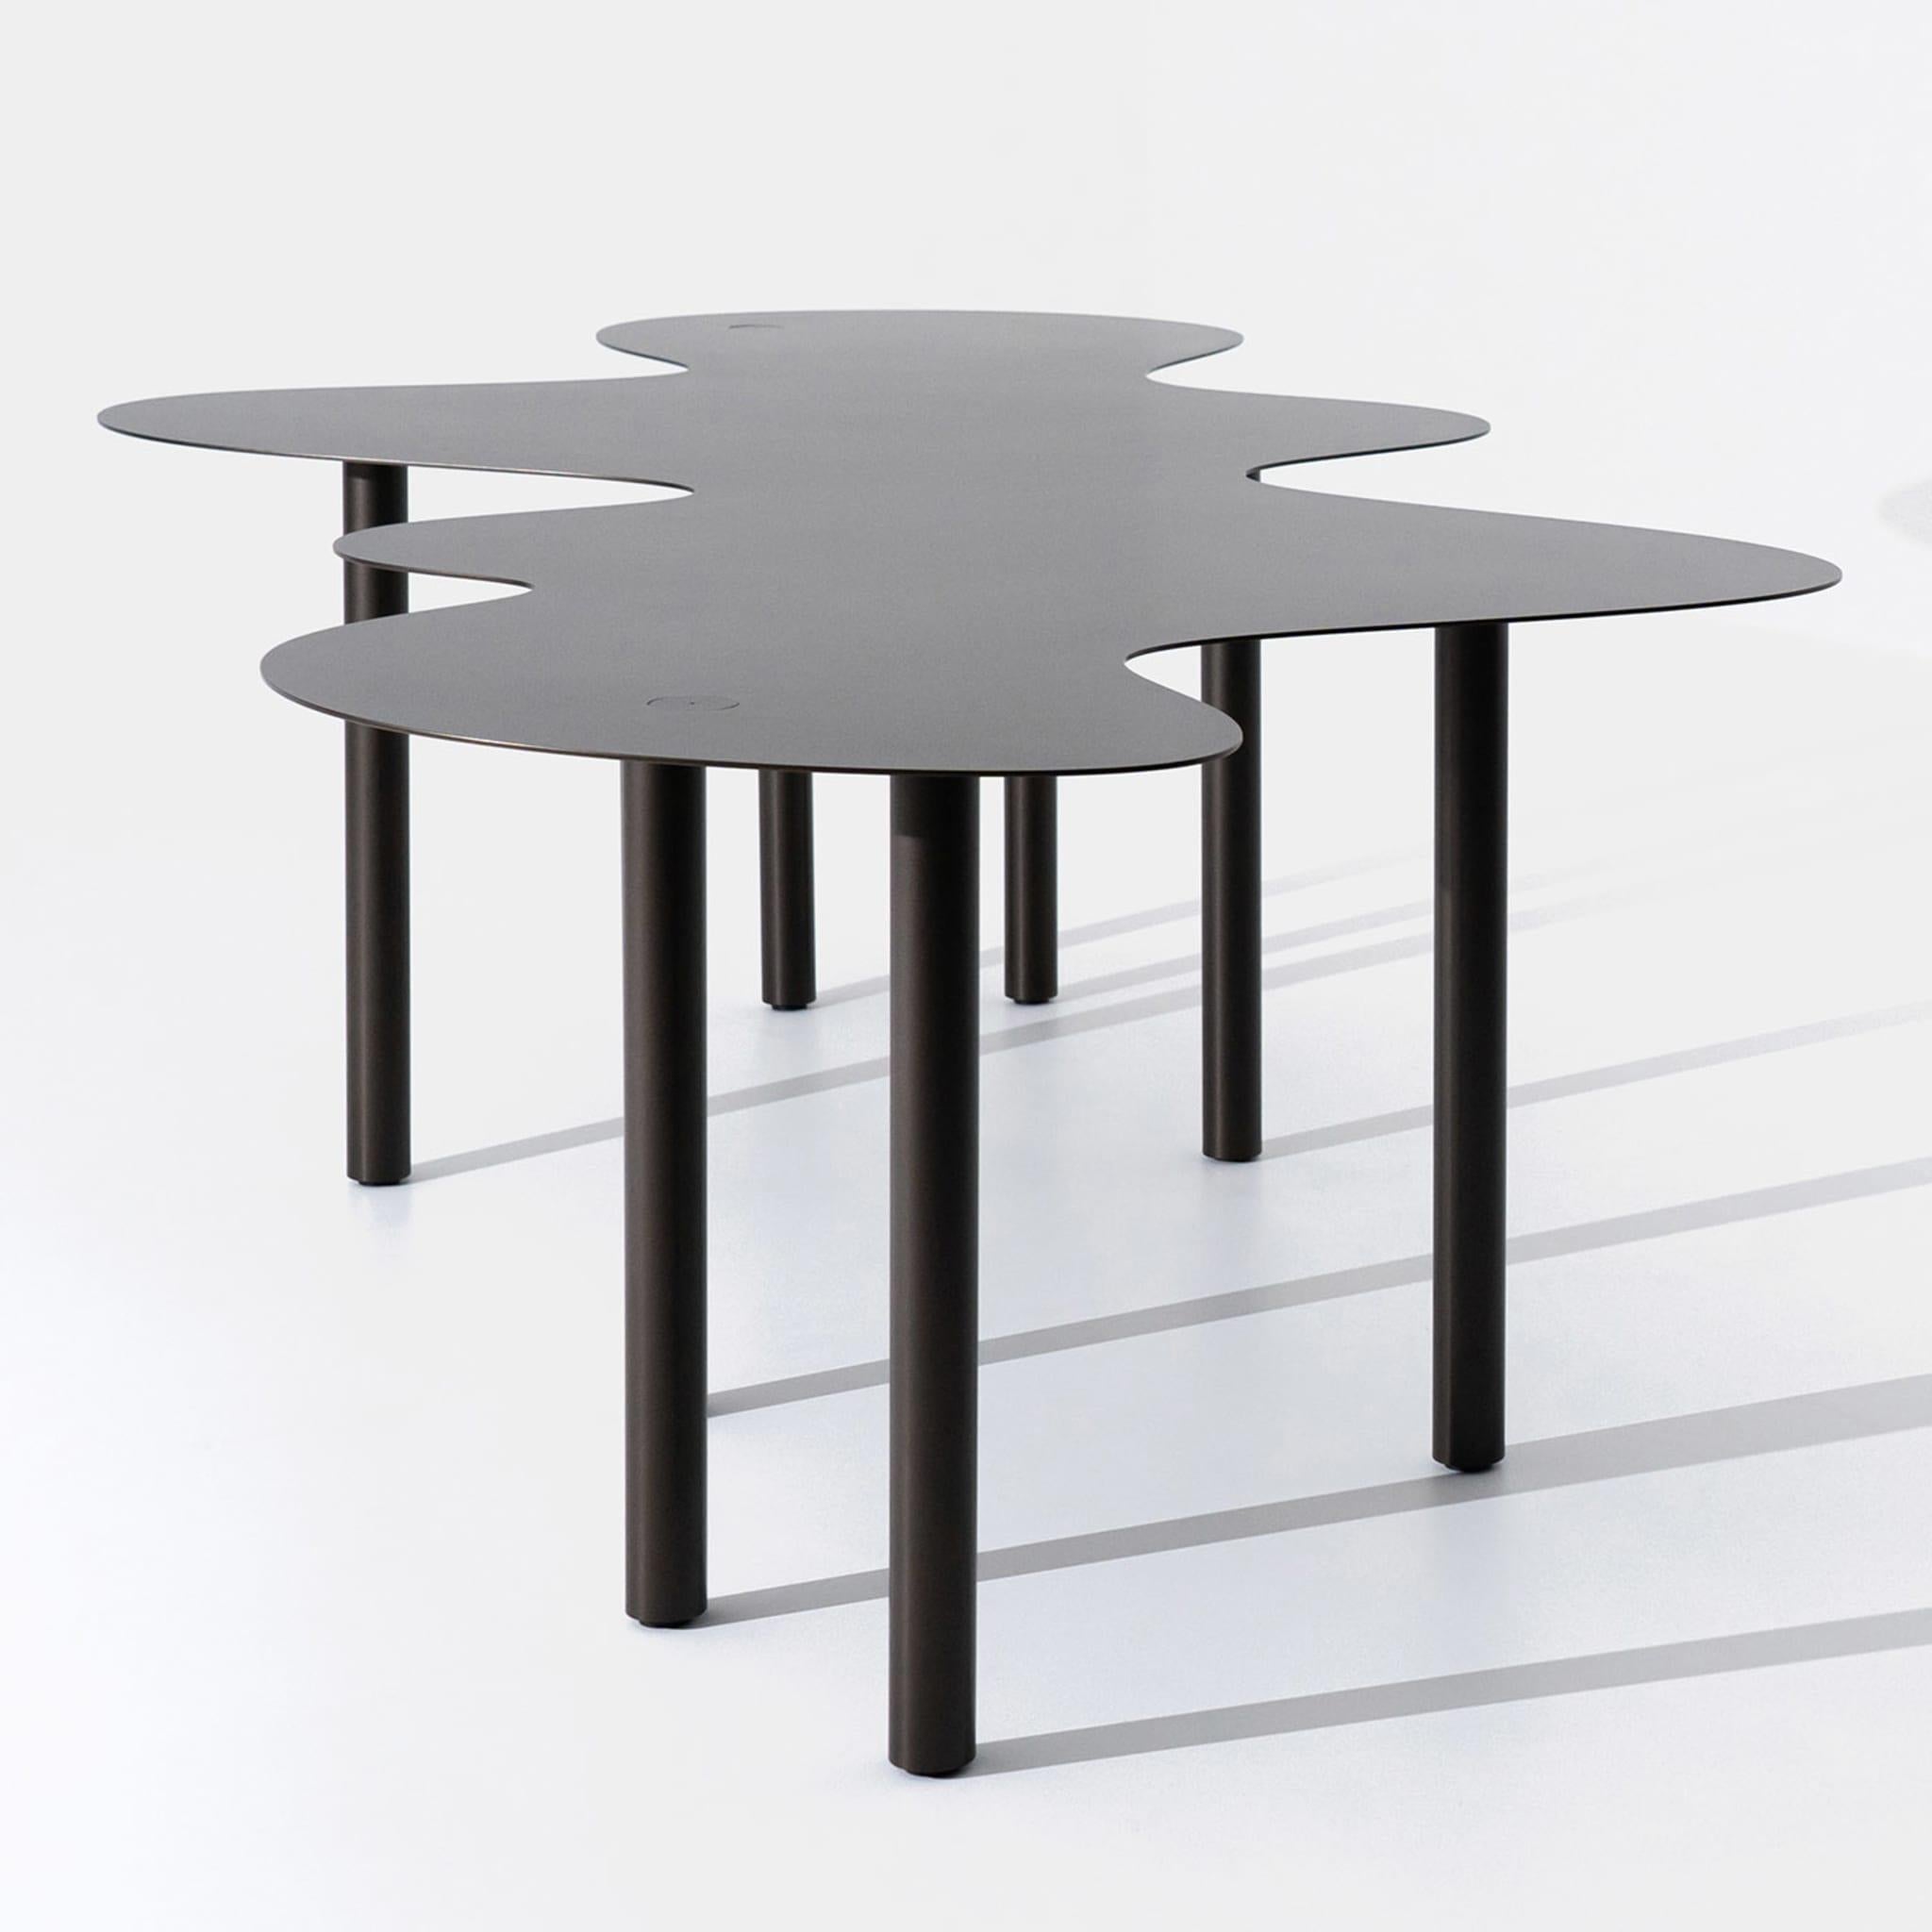 The Nuvola 01 table is the cornerstone of the collection designed by Mario Cucinella for Officine Tamborrino. The curved and fluid lines characterize it and make it a unique and evocative piece. The top is made from a single 4 mm thick steel top,